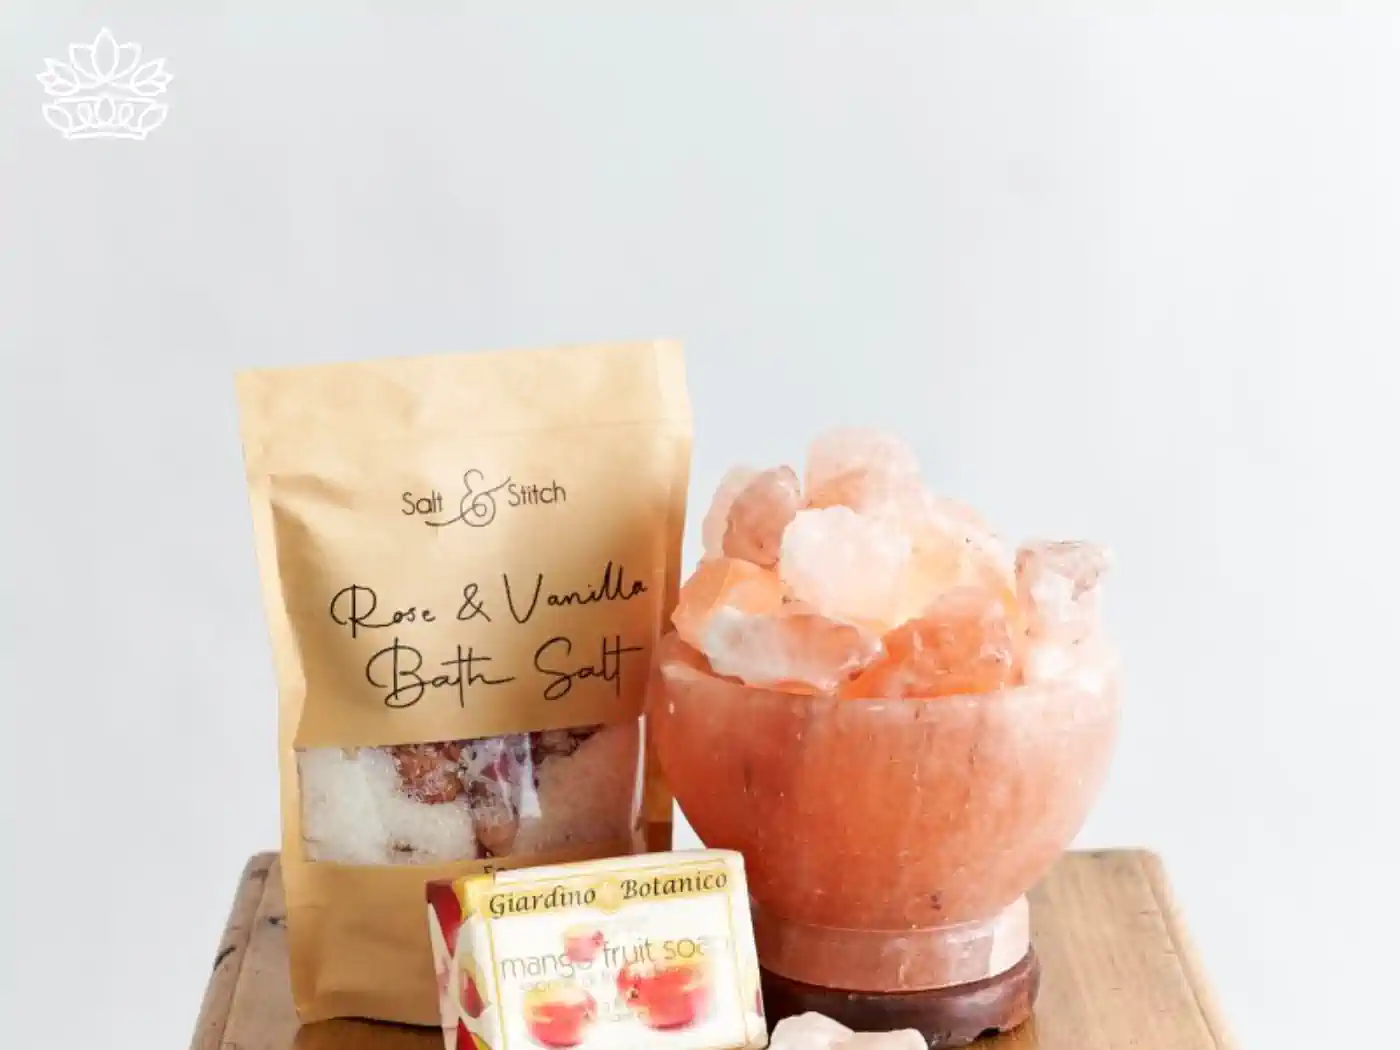 Elegant spa-themed housewarming gift with Rose & Vanilla bath salt in a craft paper pouch, a bar of mango fruit soap, and a Himalayan salt lamp on a wooden pedestal. Thoughtfully curated for relaxation and well-being. Fabulous Flowers and Gifts.